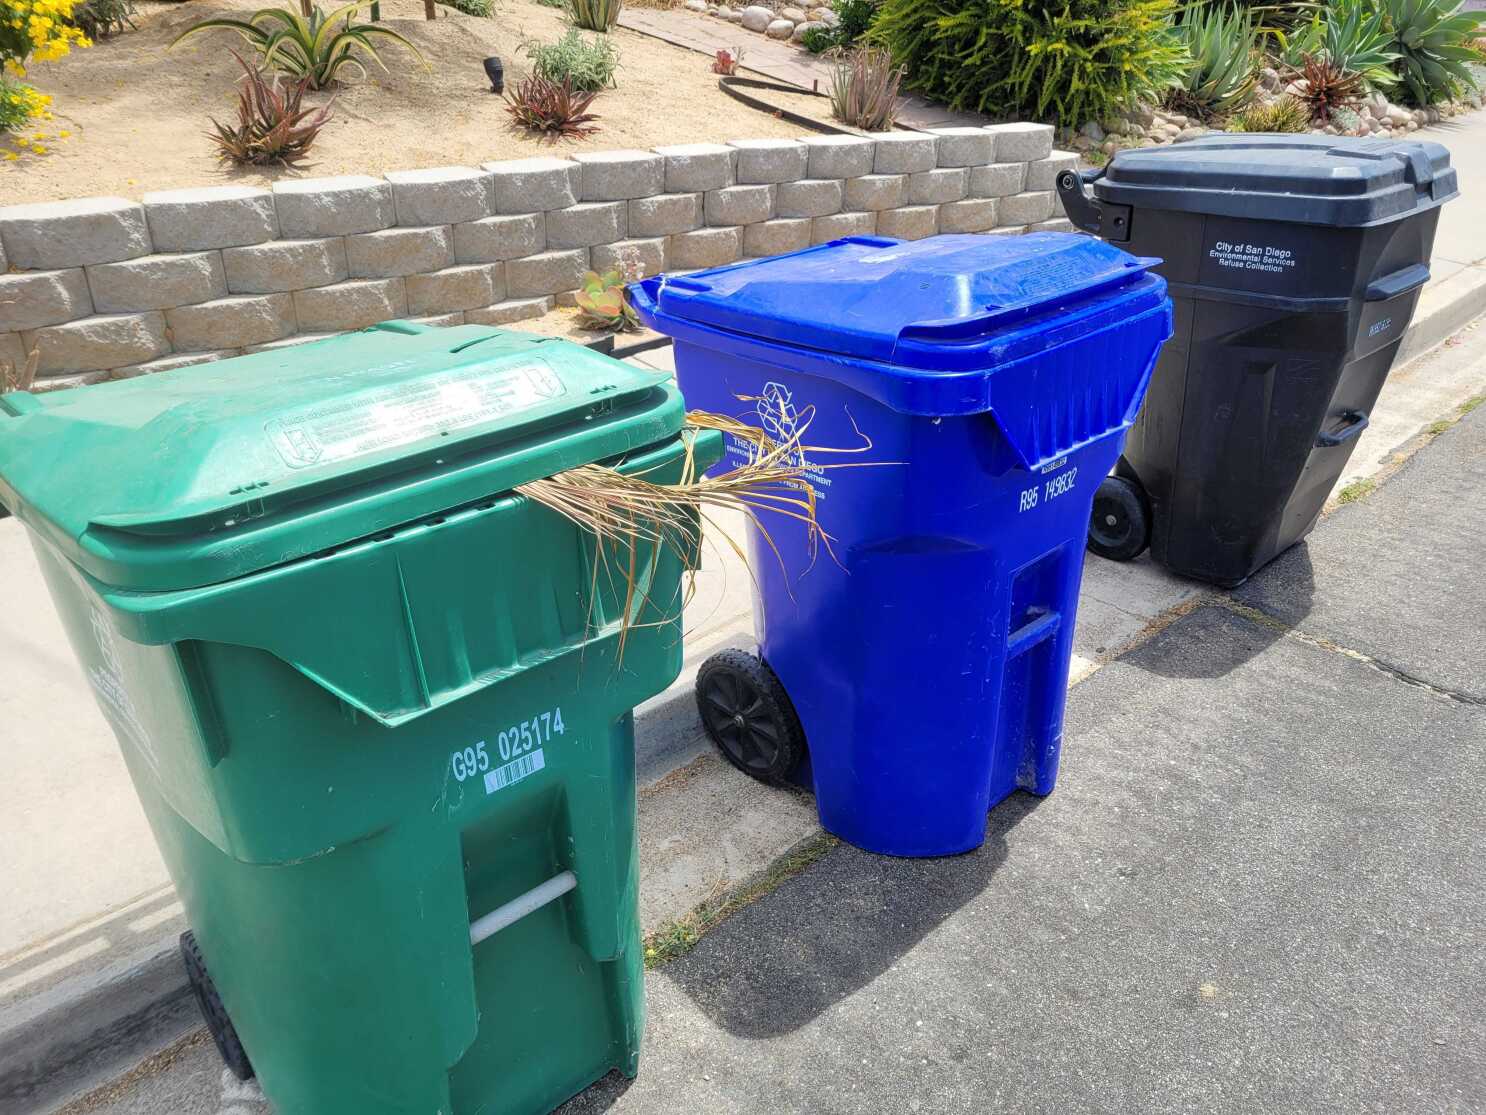 Bin There, Done That: How to Sort Your Trash at CSUN